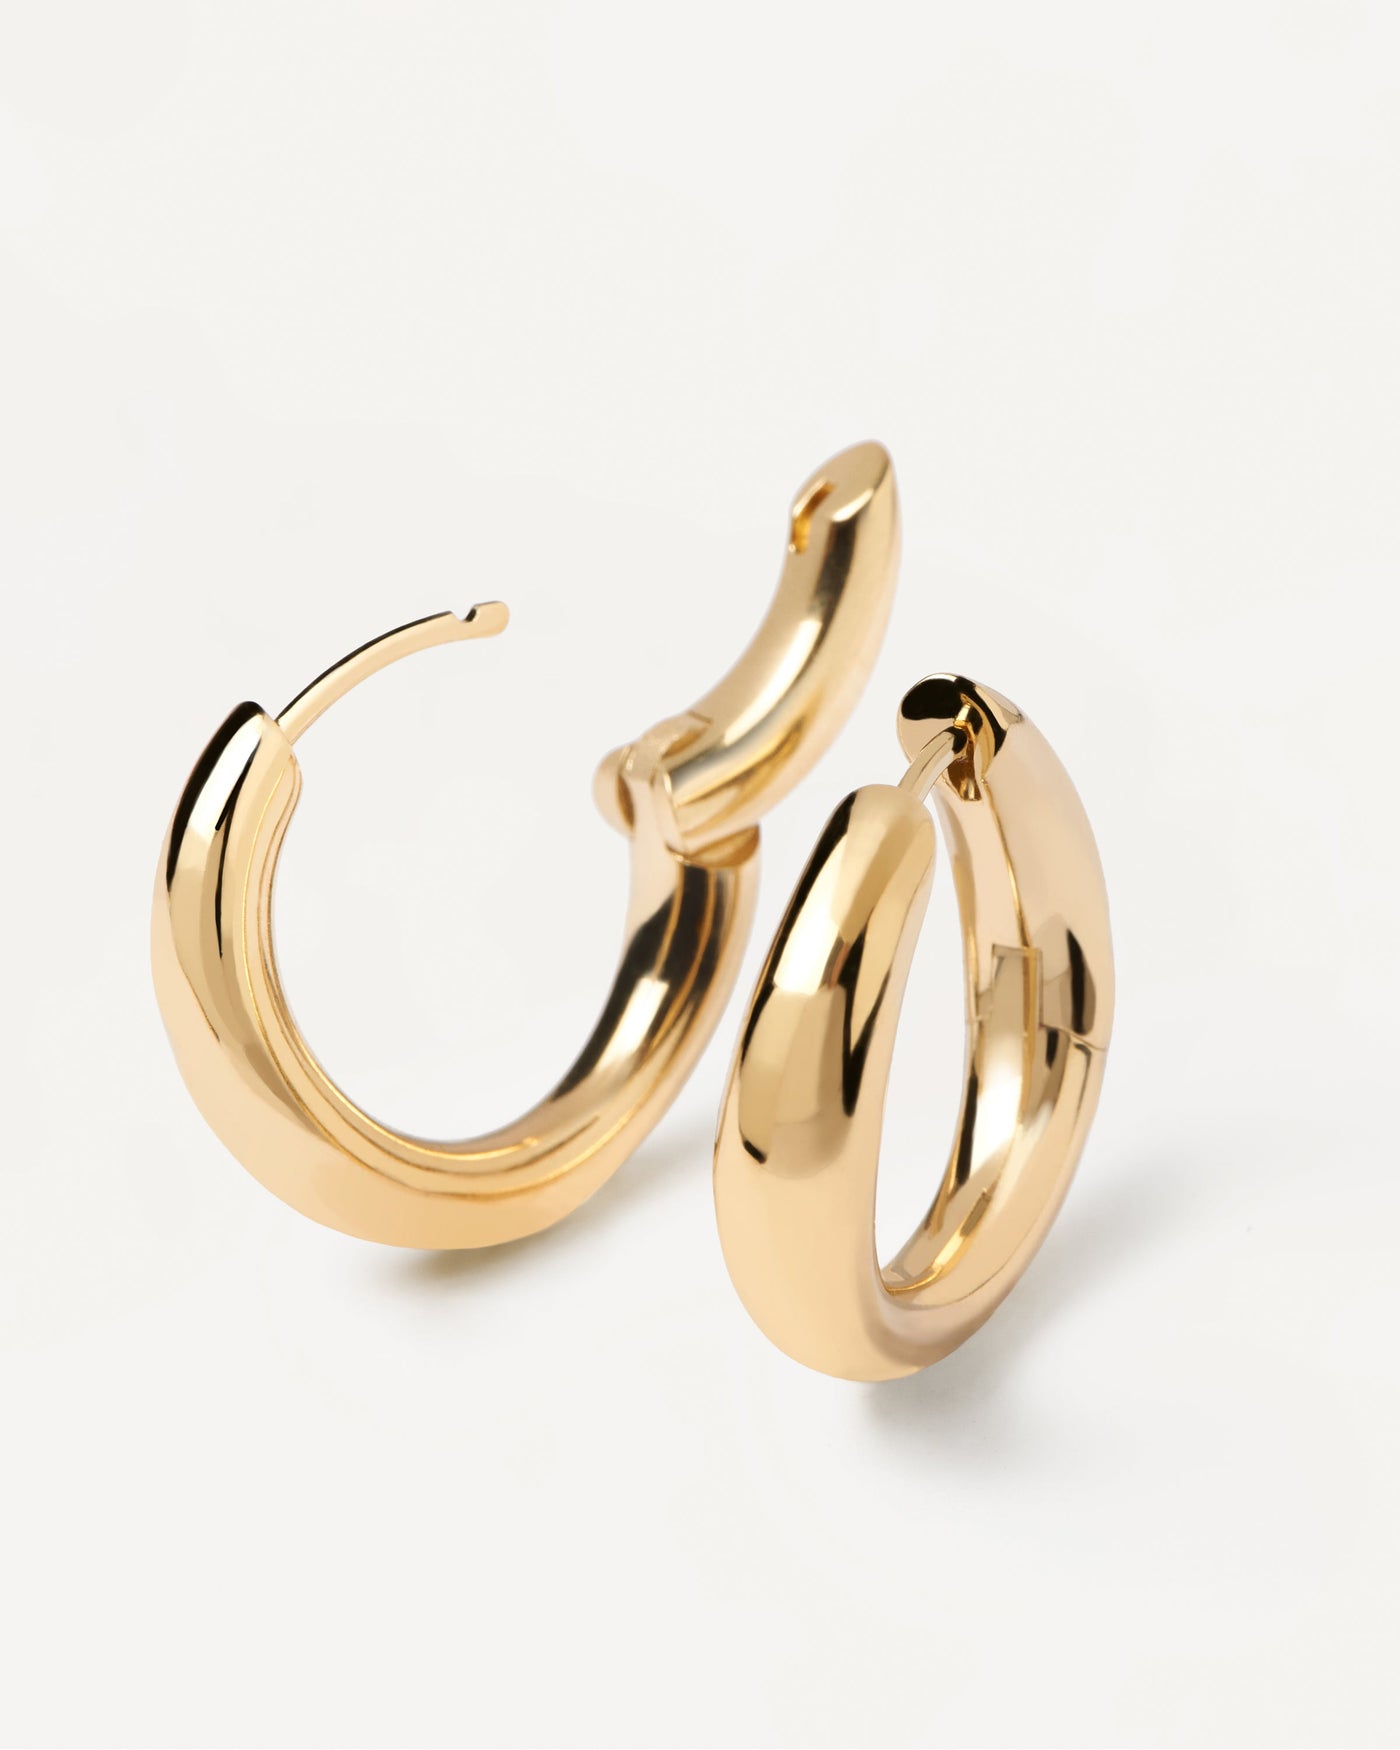 2023 Selection | Pirouette Earrings. Gold-plated silver hoops with bold and curvy design. Get the latest arrival from PDPAOLA. Place your order safely and get this Best Seller. Free Shipping.